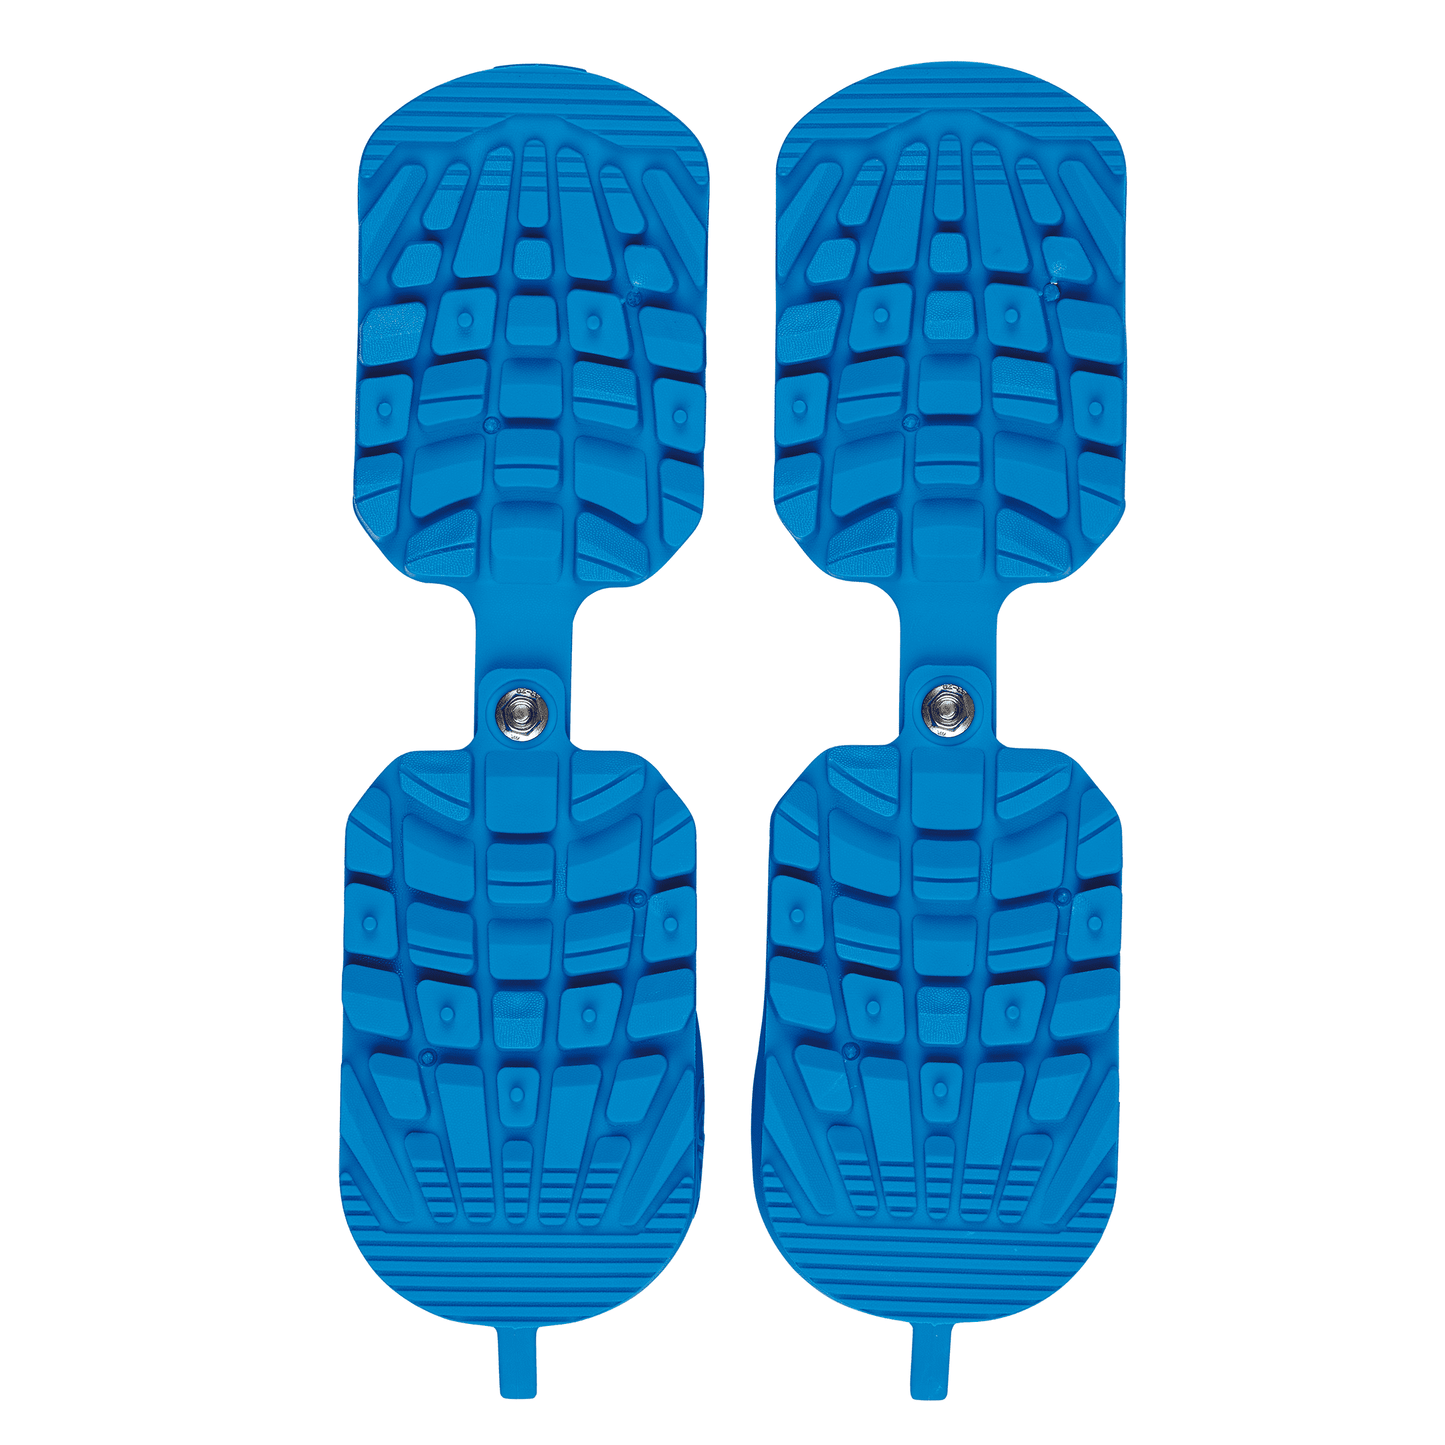 Sidas Ski Boot Traction Soles